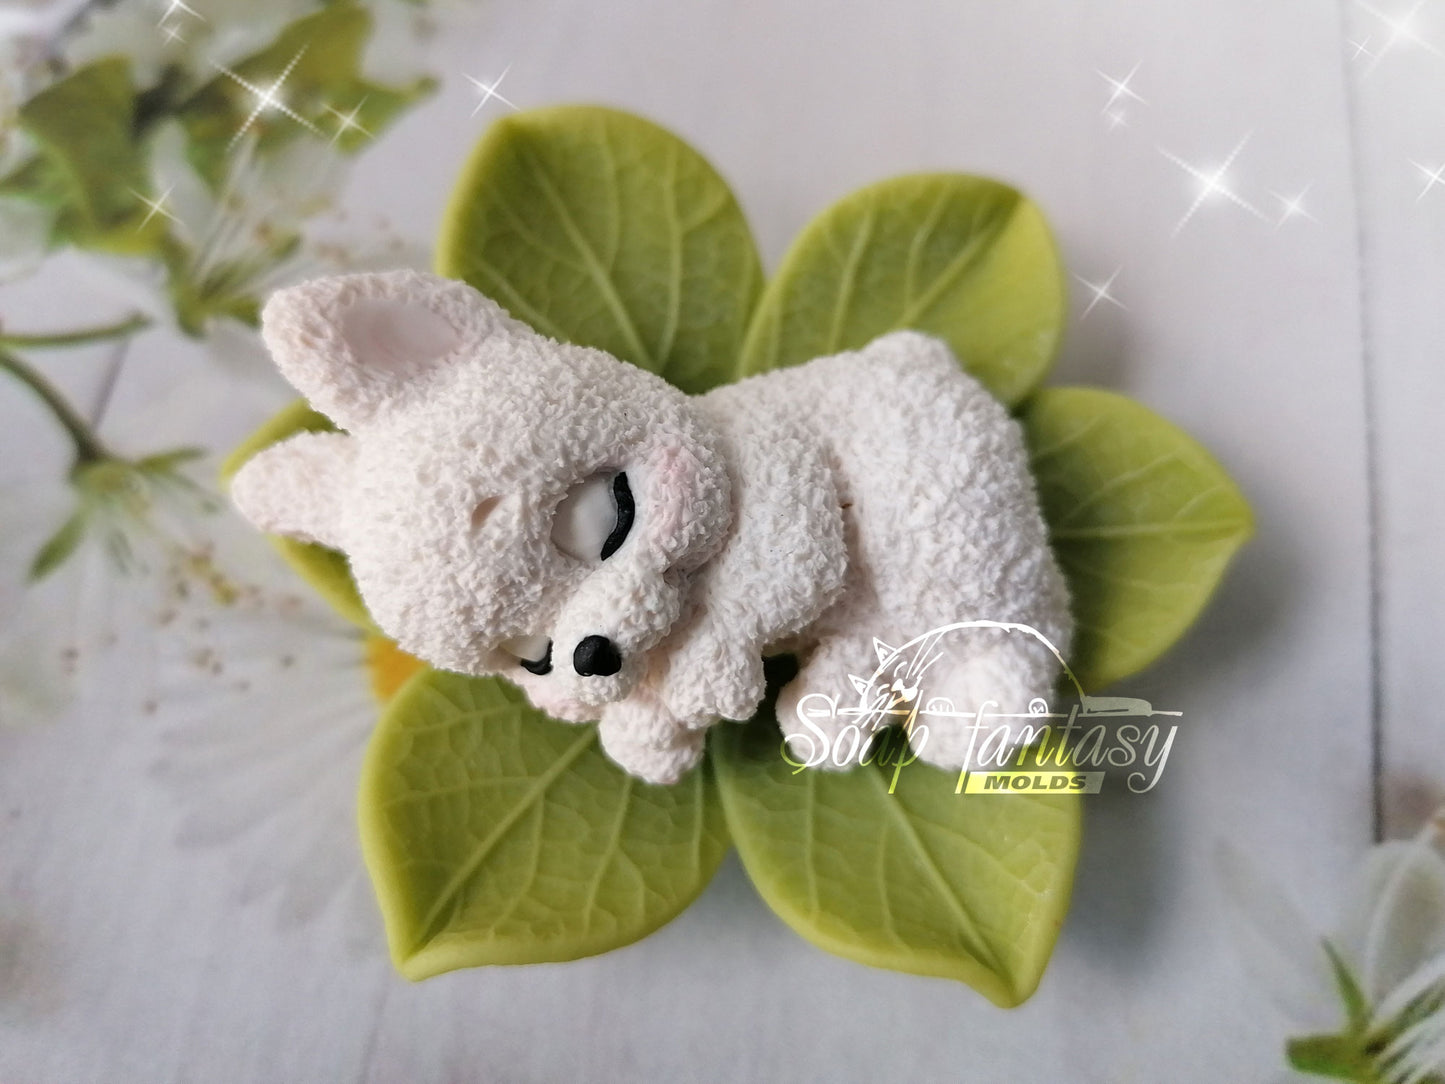 Sleeping bunny "Zephyr" silicone mold for soap making